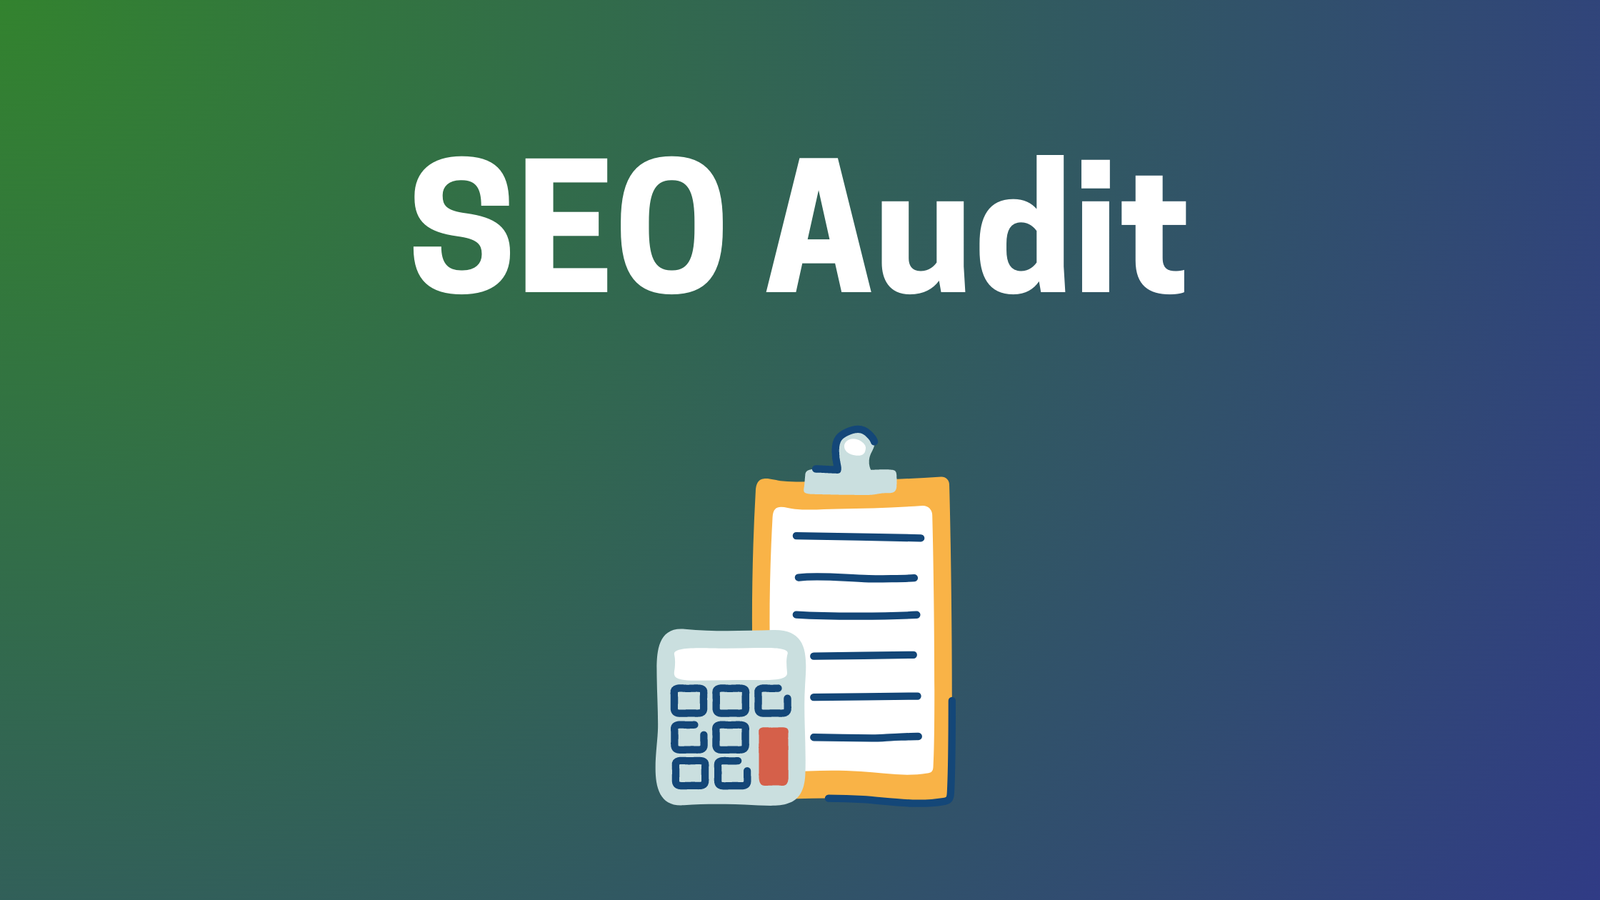 How to Conduct an SEO Audit That Delivers Results